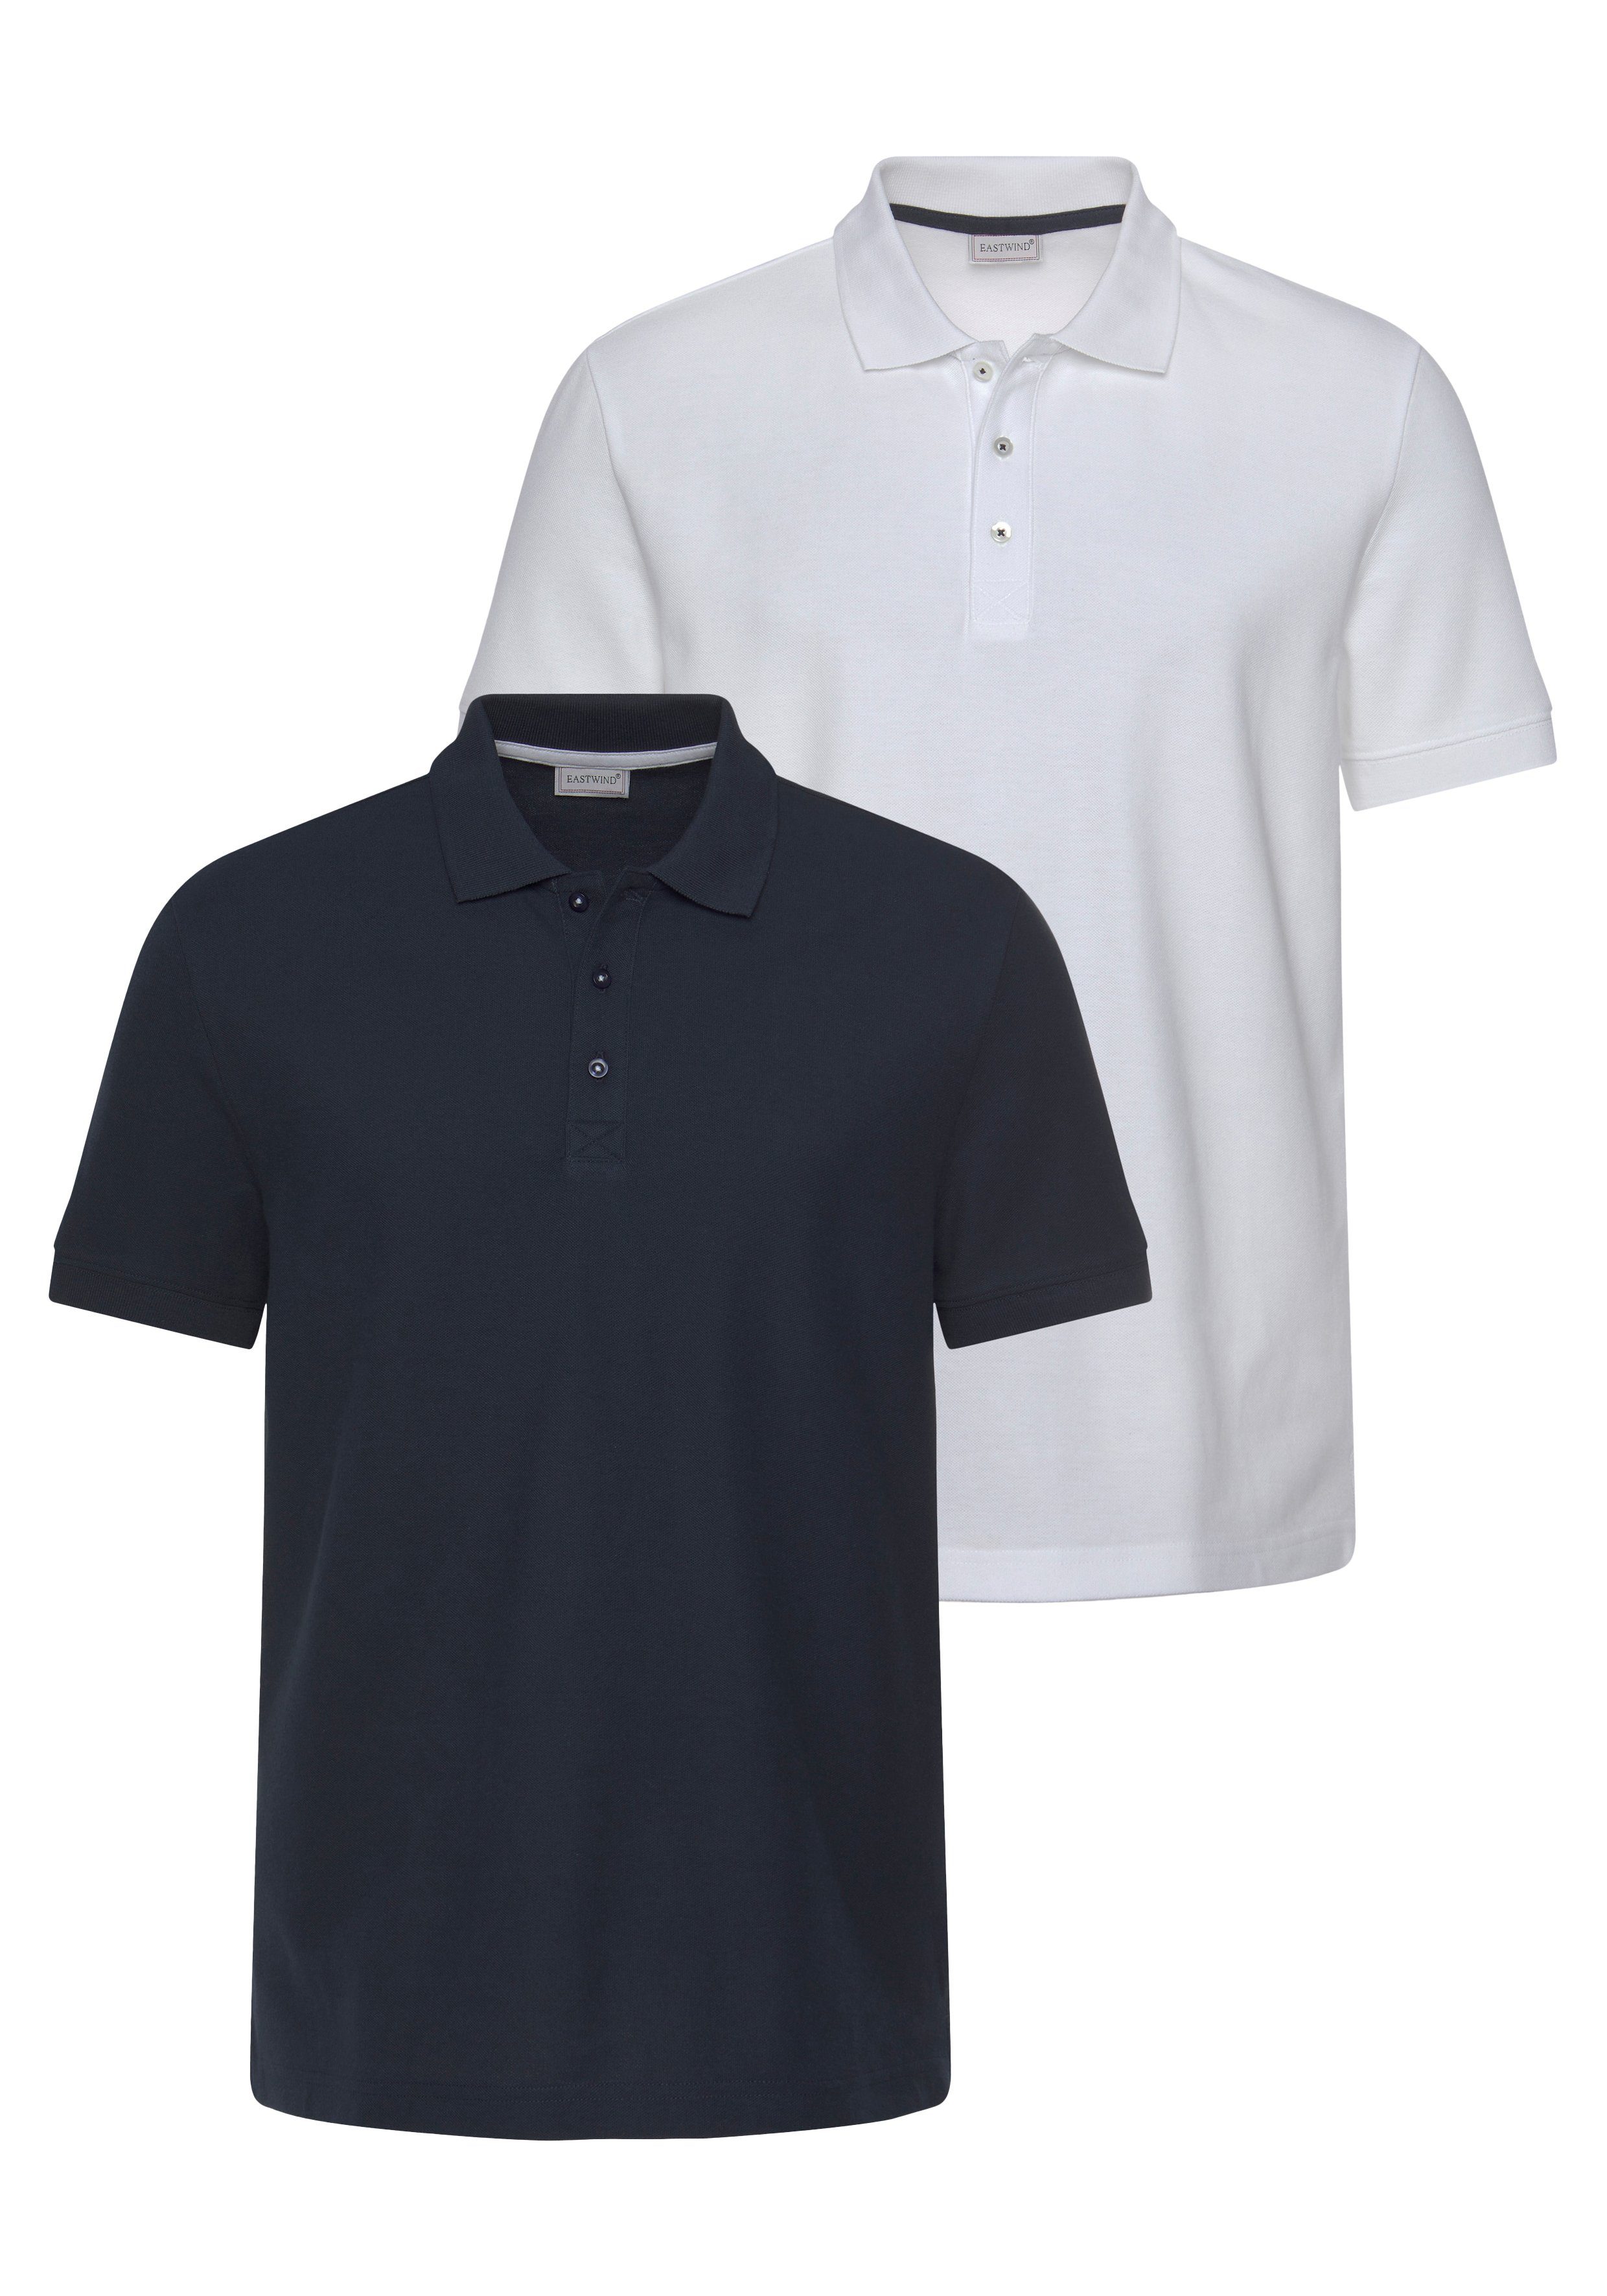 Poloshirt marine-weiß Eastwind Double Pack Polo, (2er-Pack) navy+white